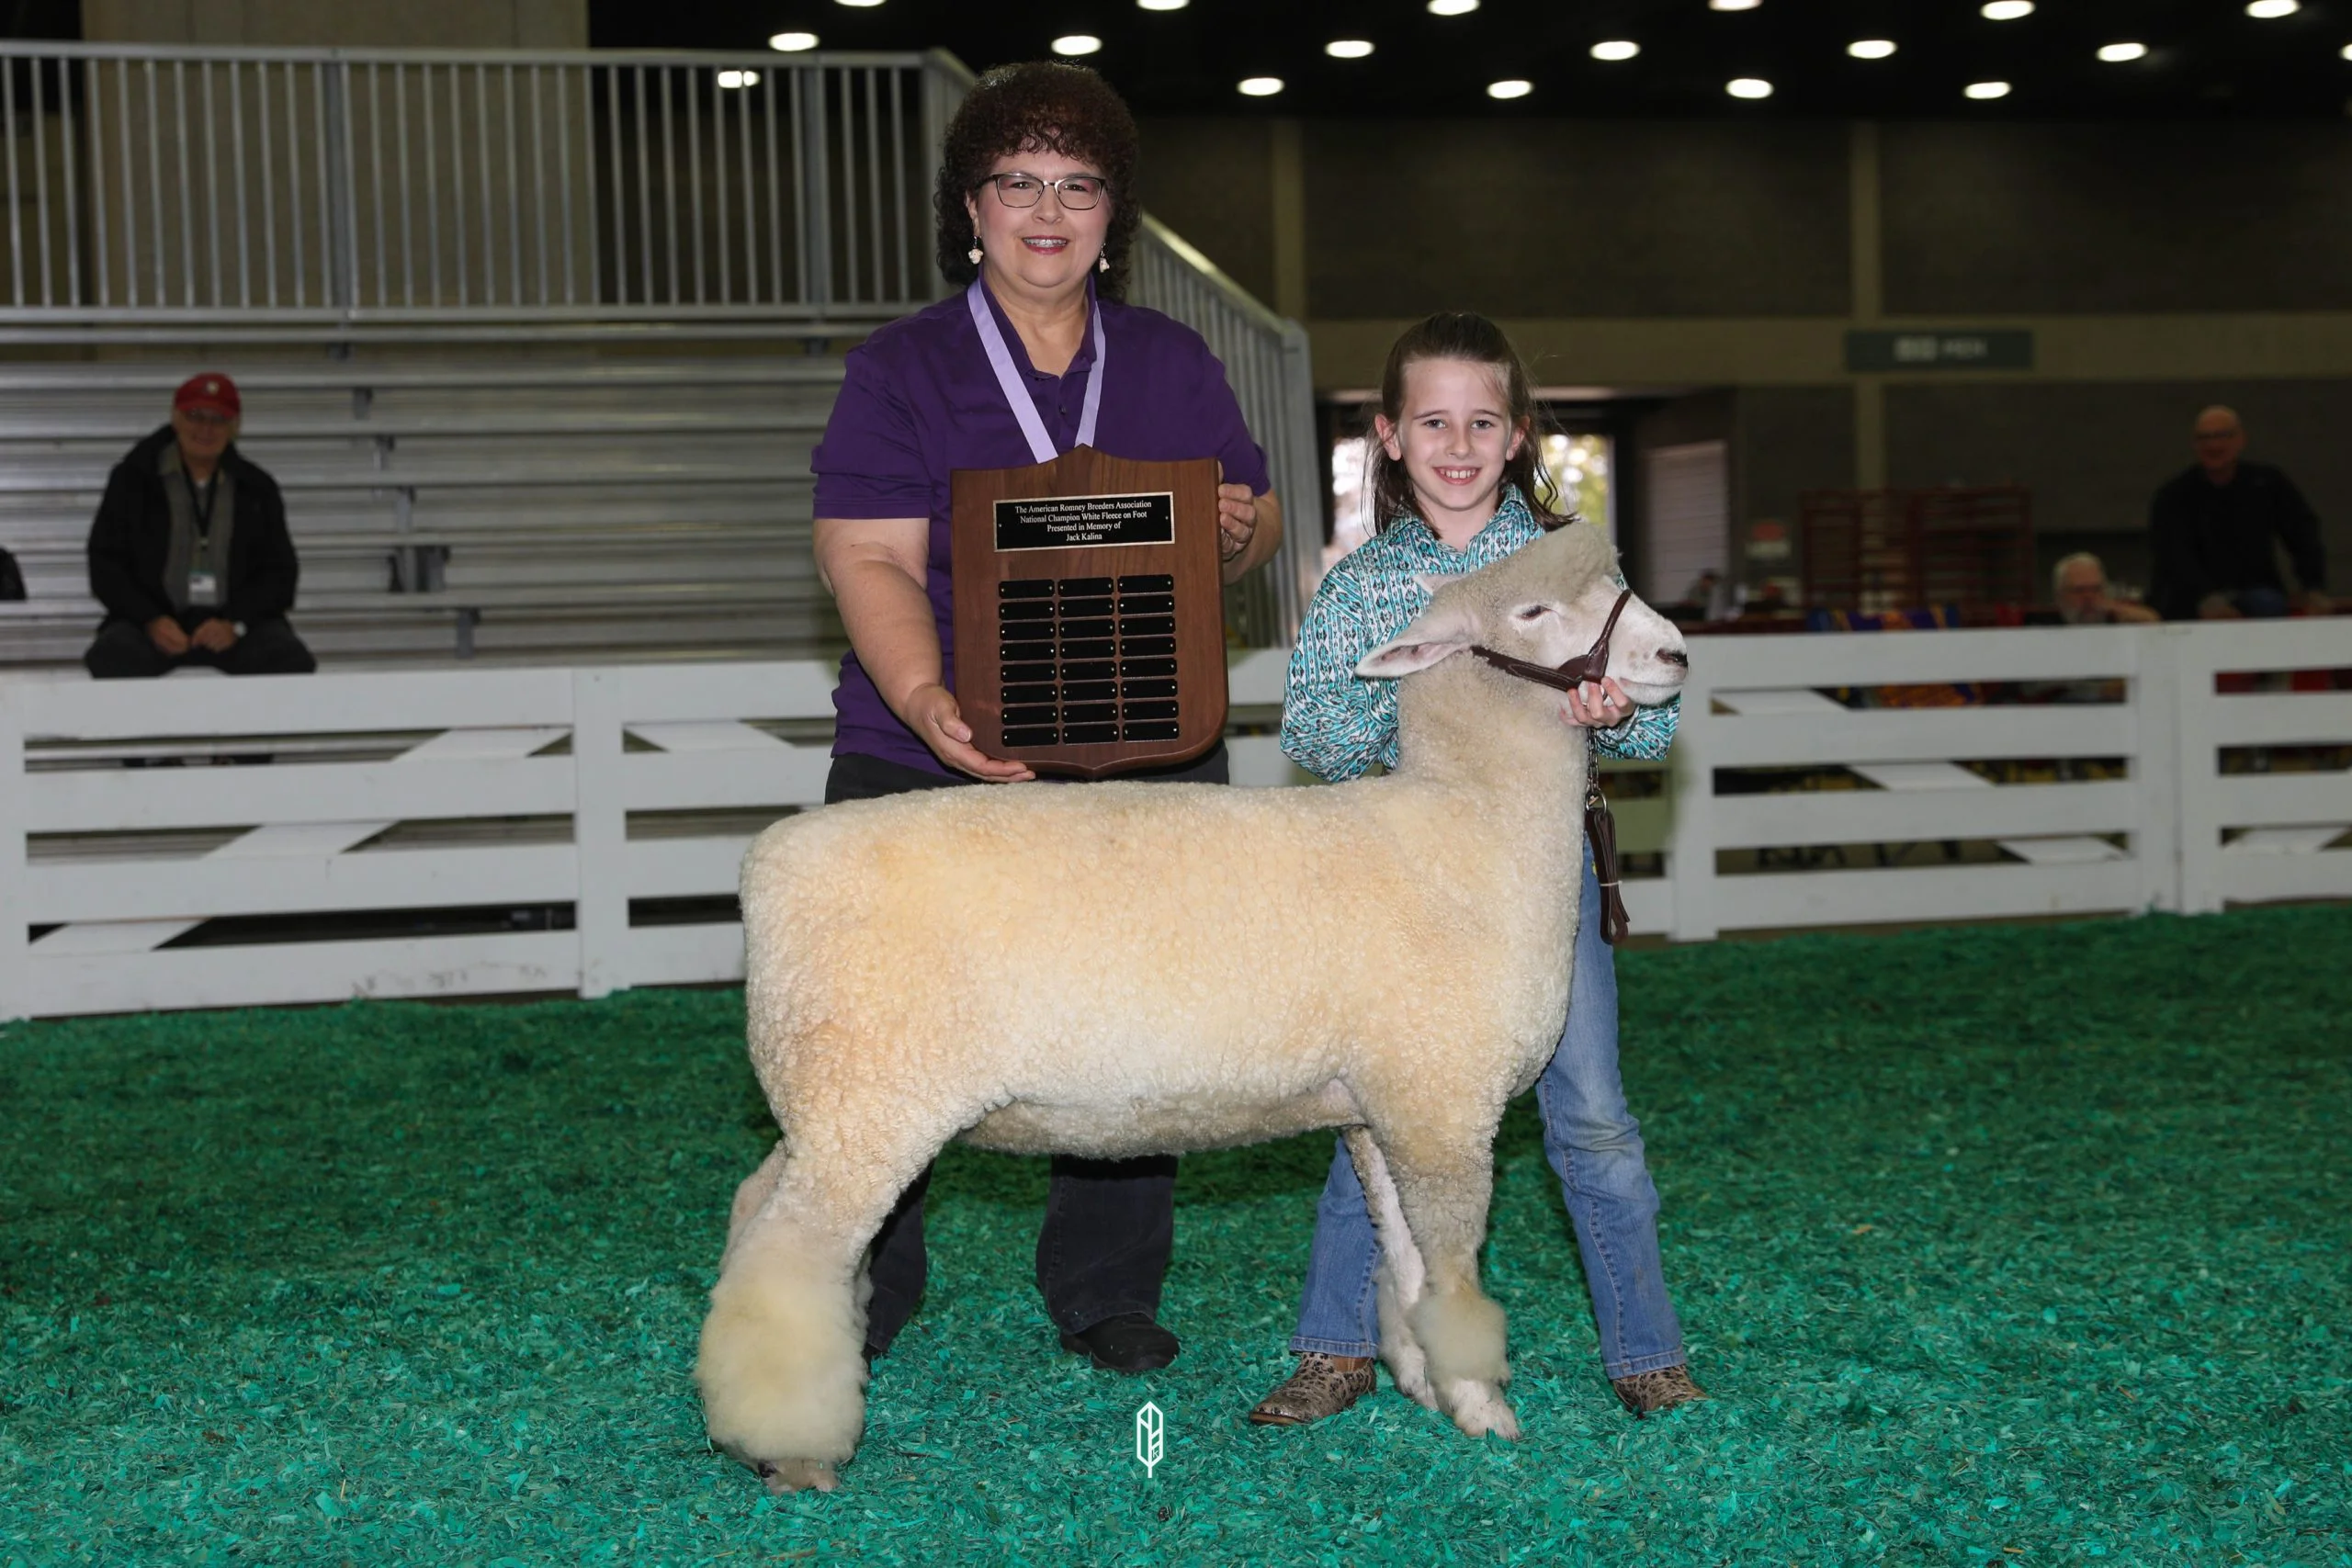 2023 National White Romney Show at NAILE
Best Fleeced White Romney exhibited by Katelyn Oberholtzer